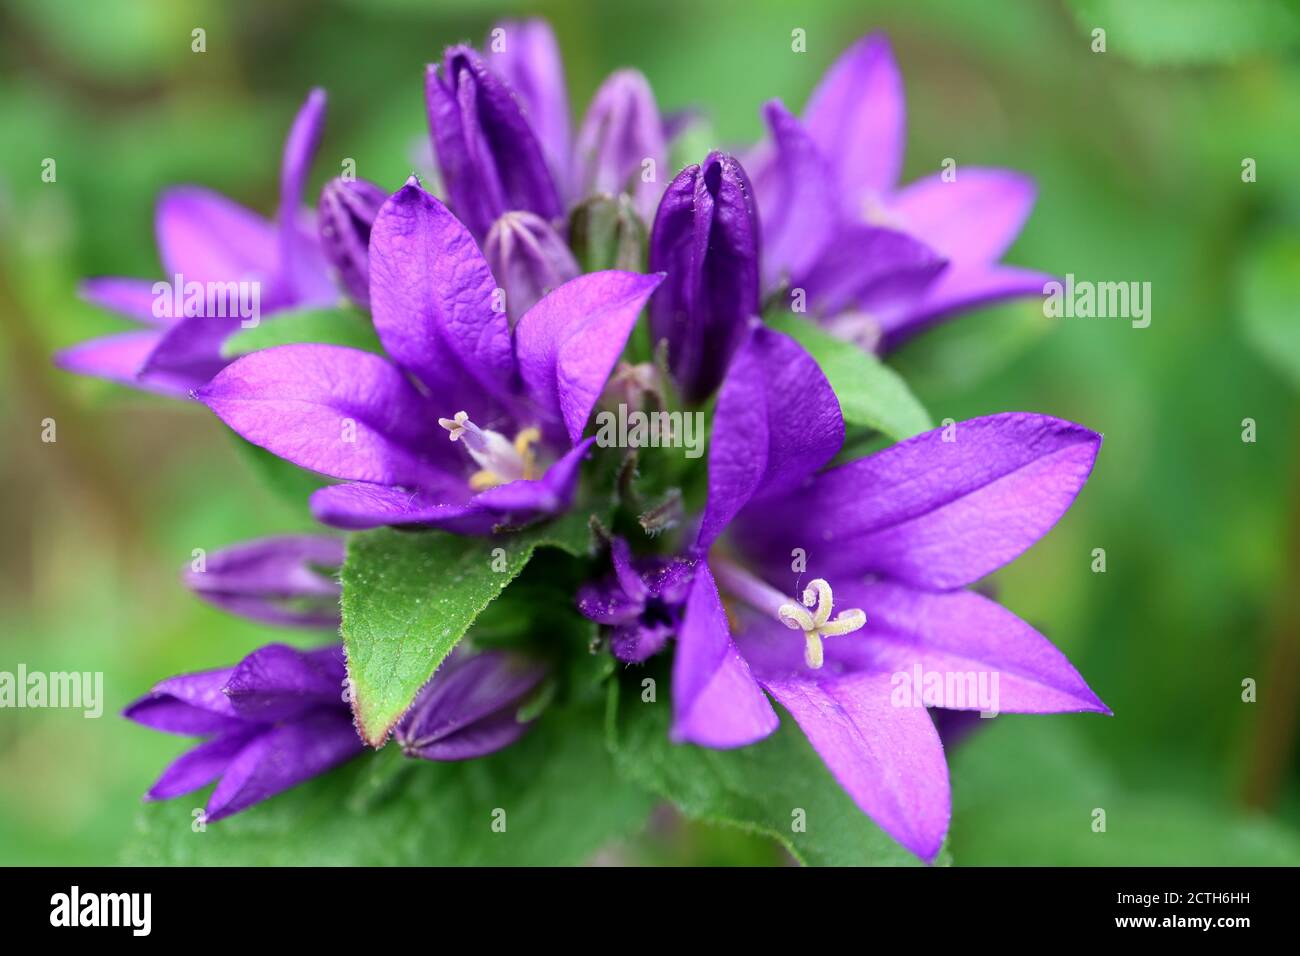 Purple Bell flower in the garden, Purple Campanula Glomerata, Purple Bell flower macro, Purple Bell Flower with green leaves, Beauty in nature stock Stock Photo